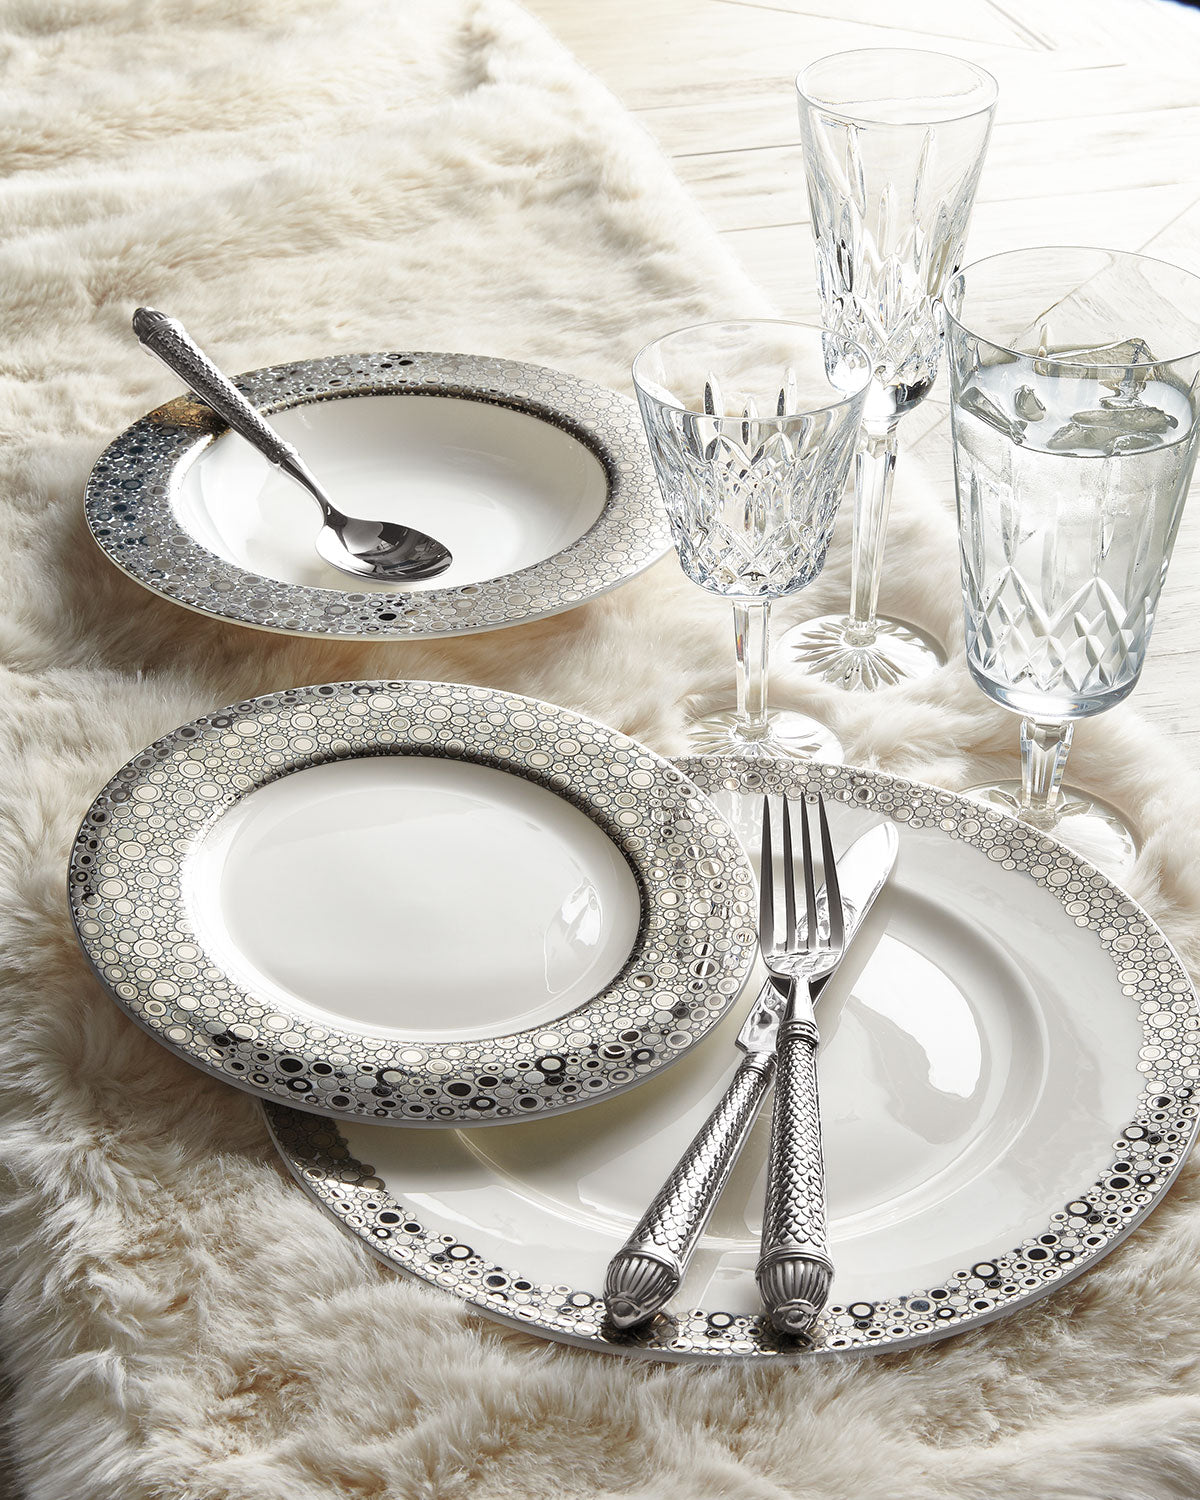 A Caskata Artisanal Home Ellington Shine Platinum Rimmed Soup Bowl and silverware on a white rug, suitable for traveling or camping.